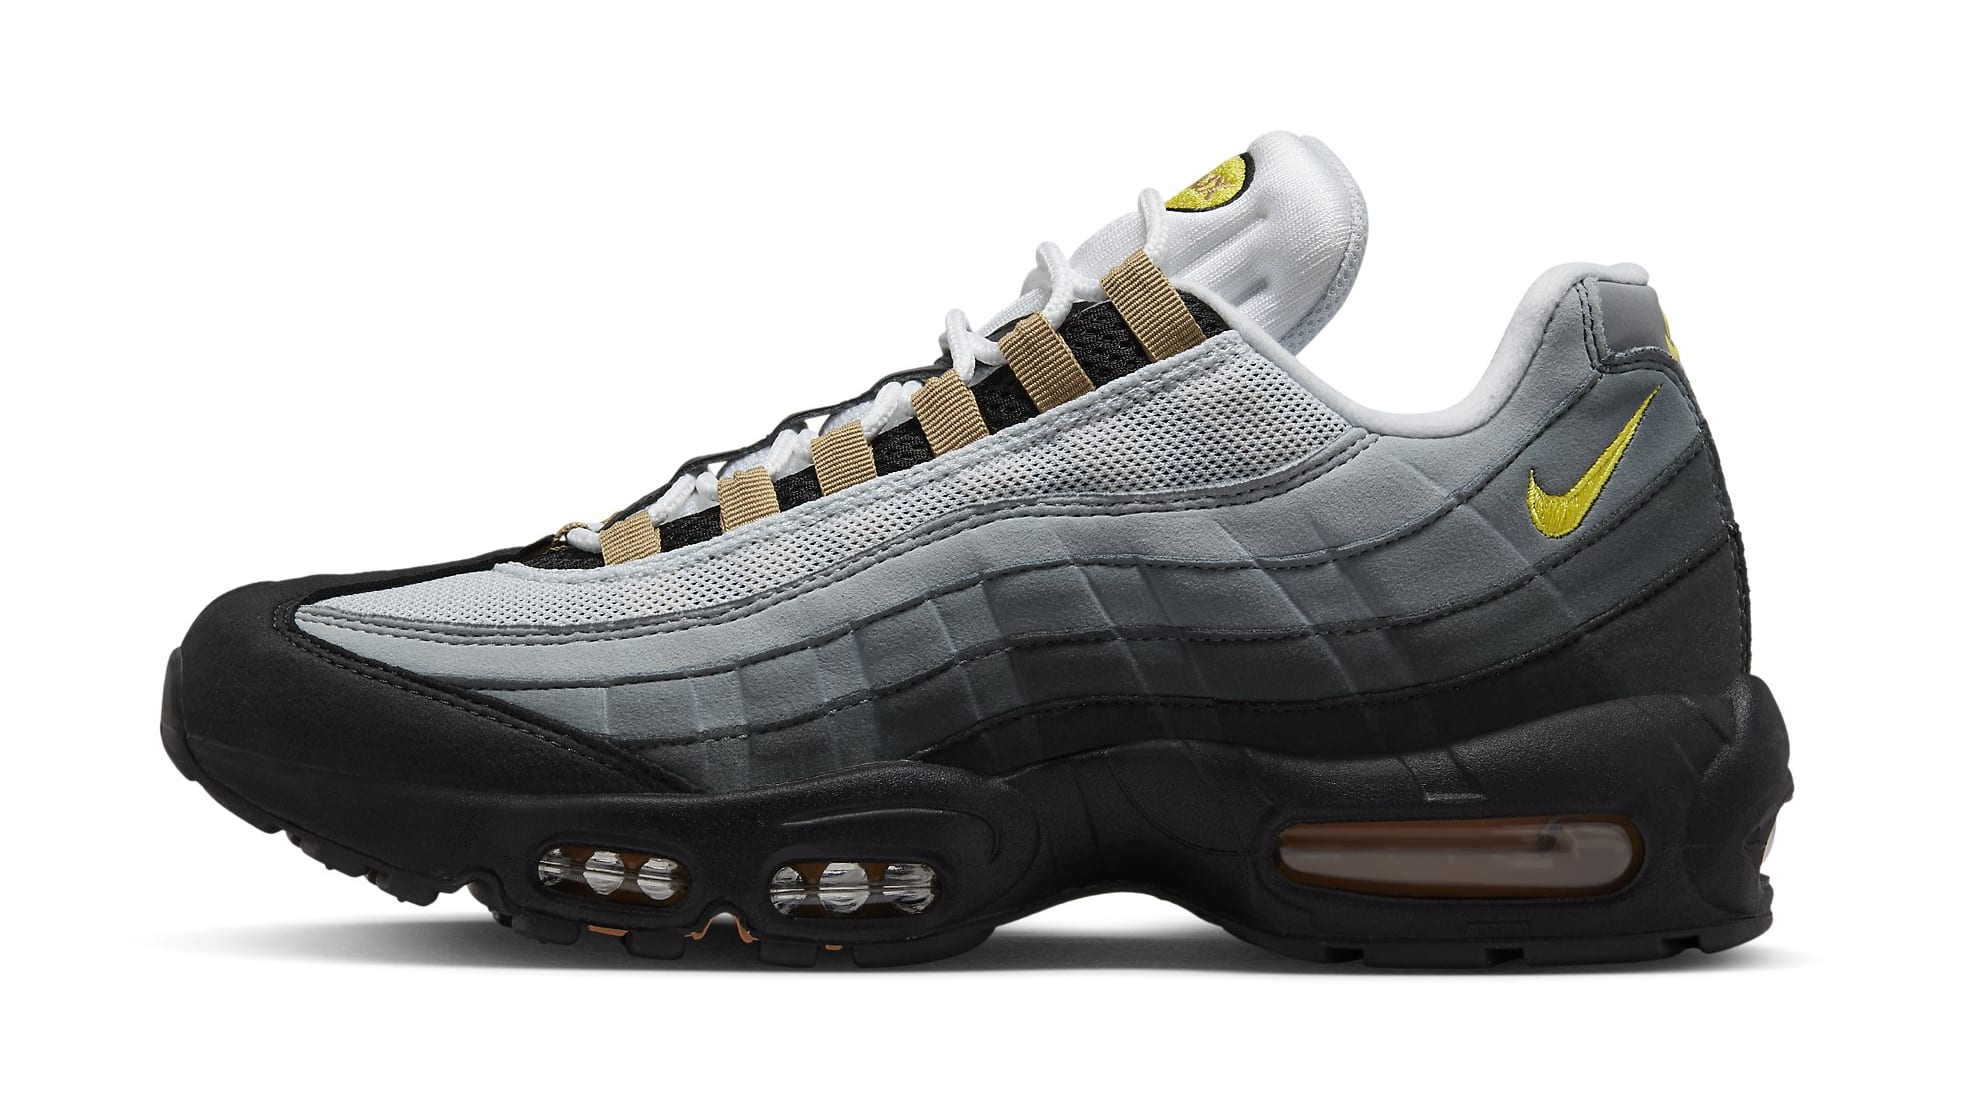 Nike Air Max 95 'Brutal Honey' DX4236 100 Lateral